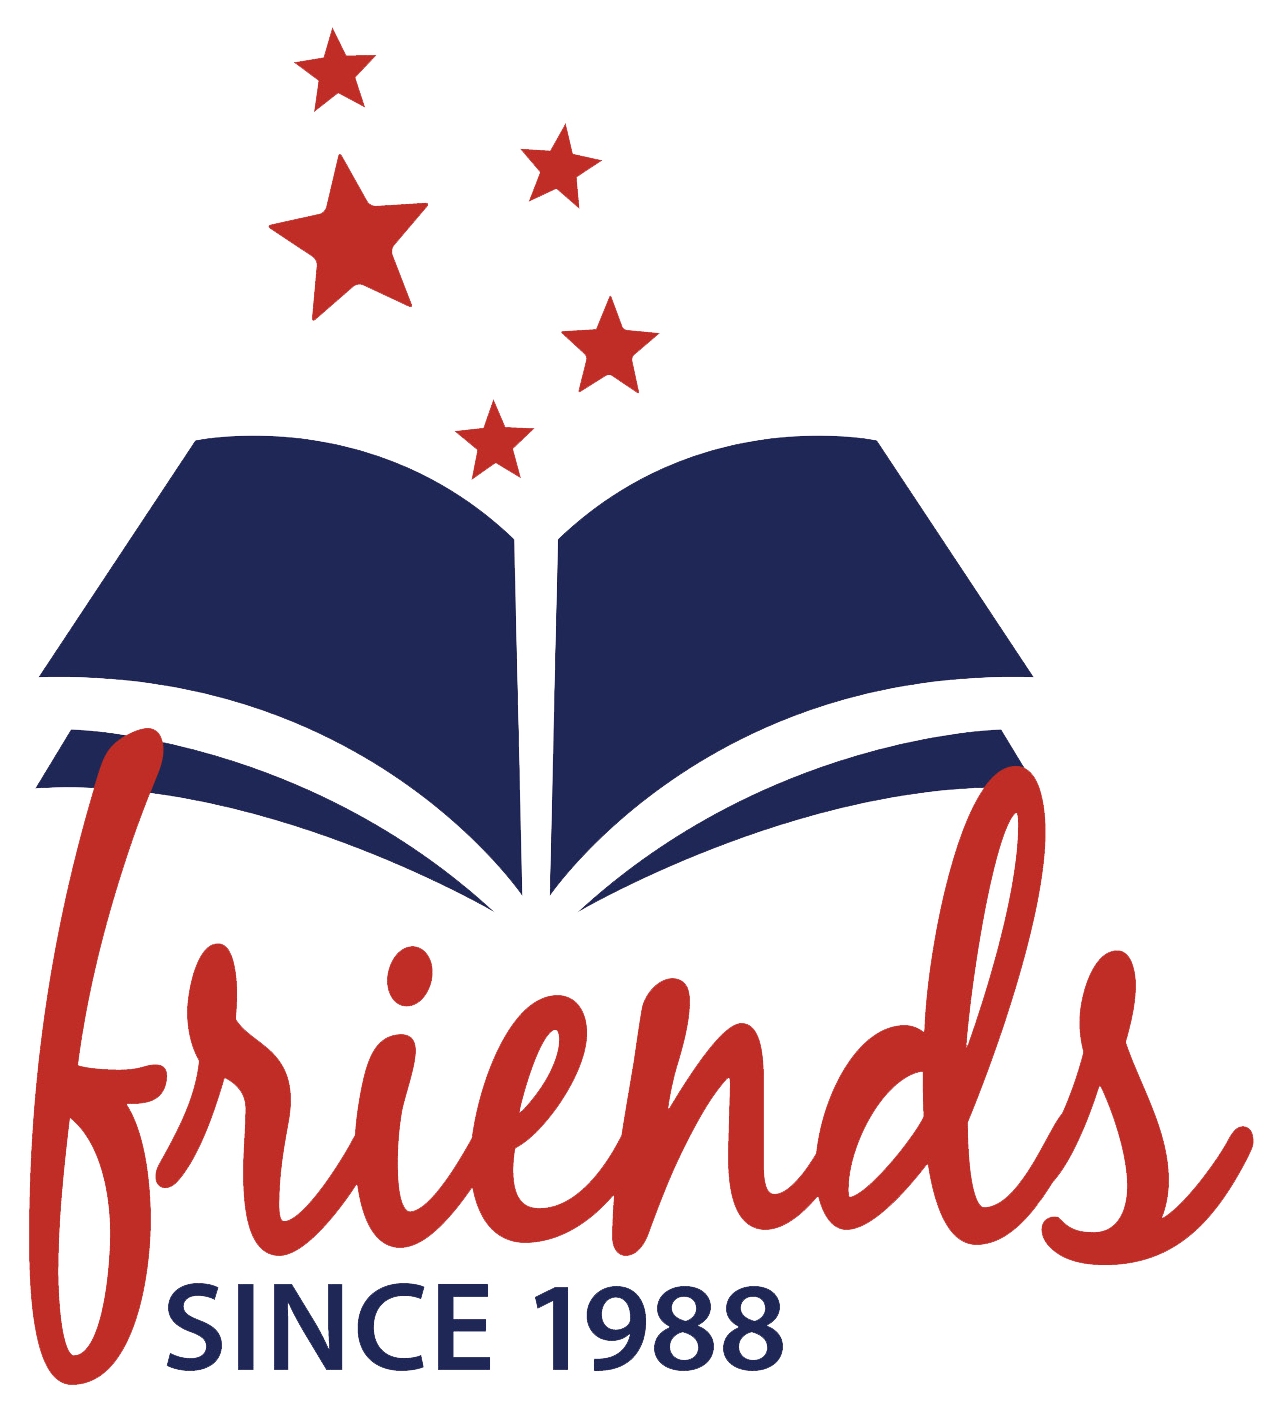 Friends of FDLPL annual meeting will feature talk by local author